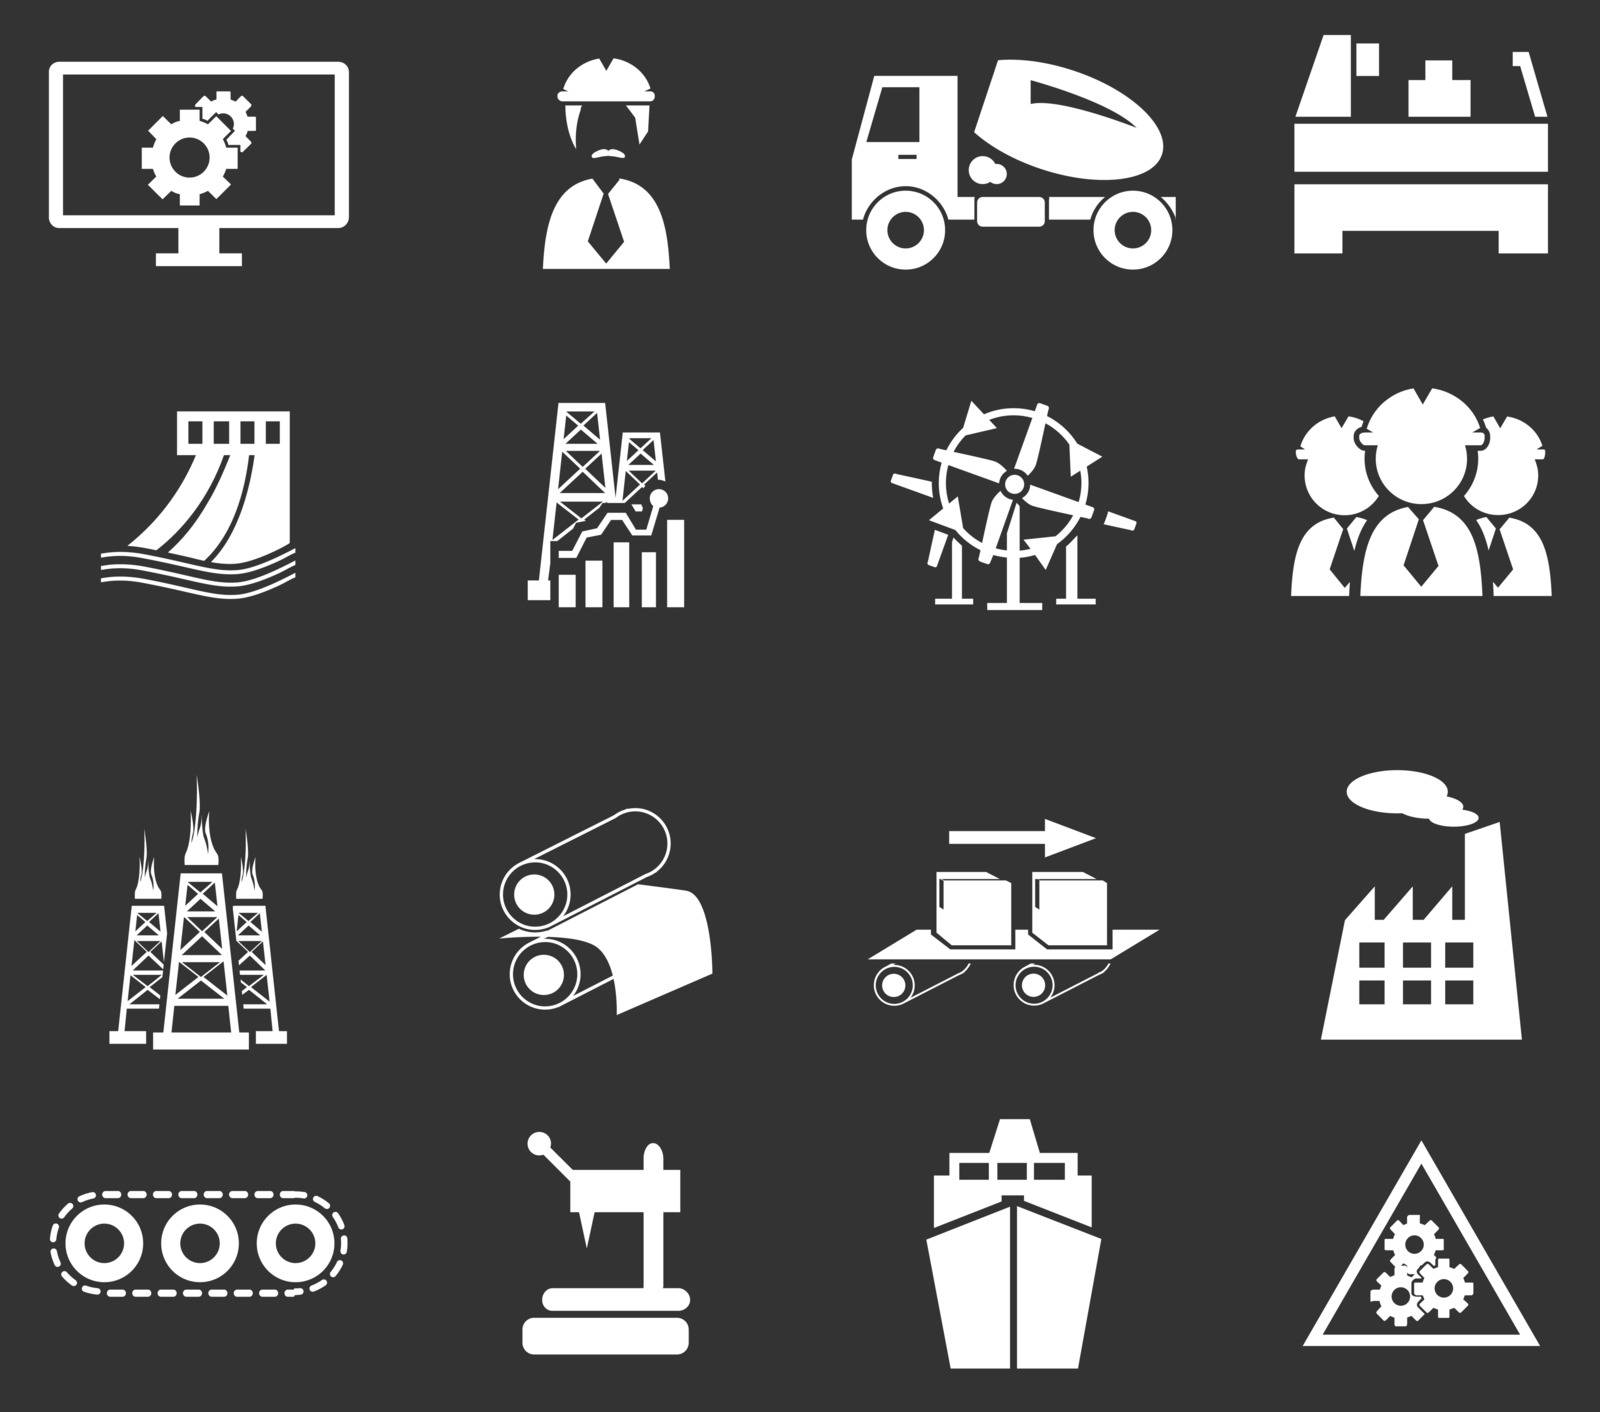 Industry simply icons for web and user interfaces